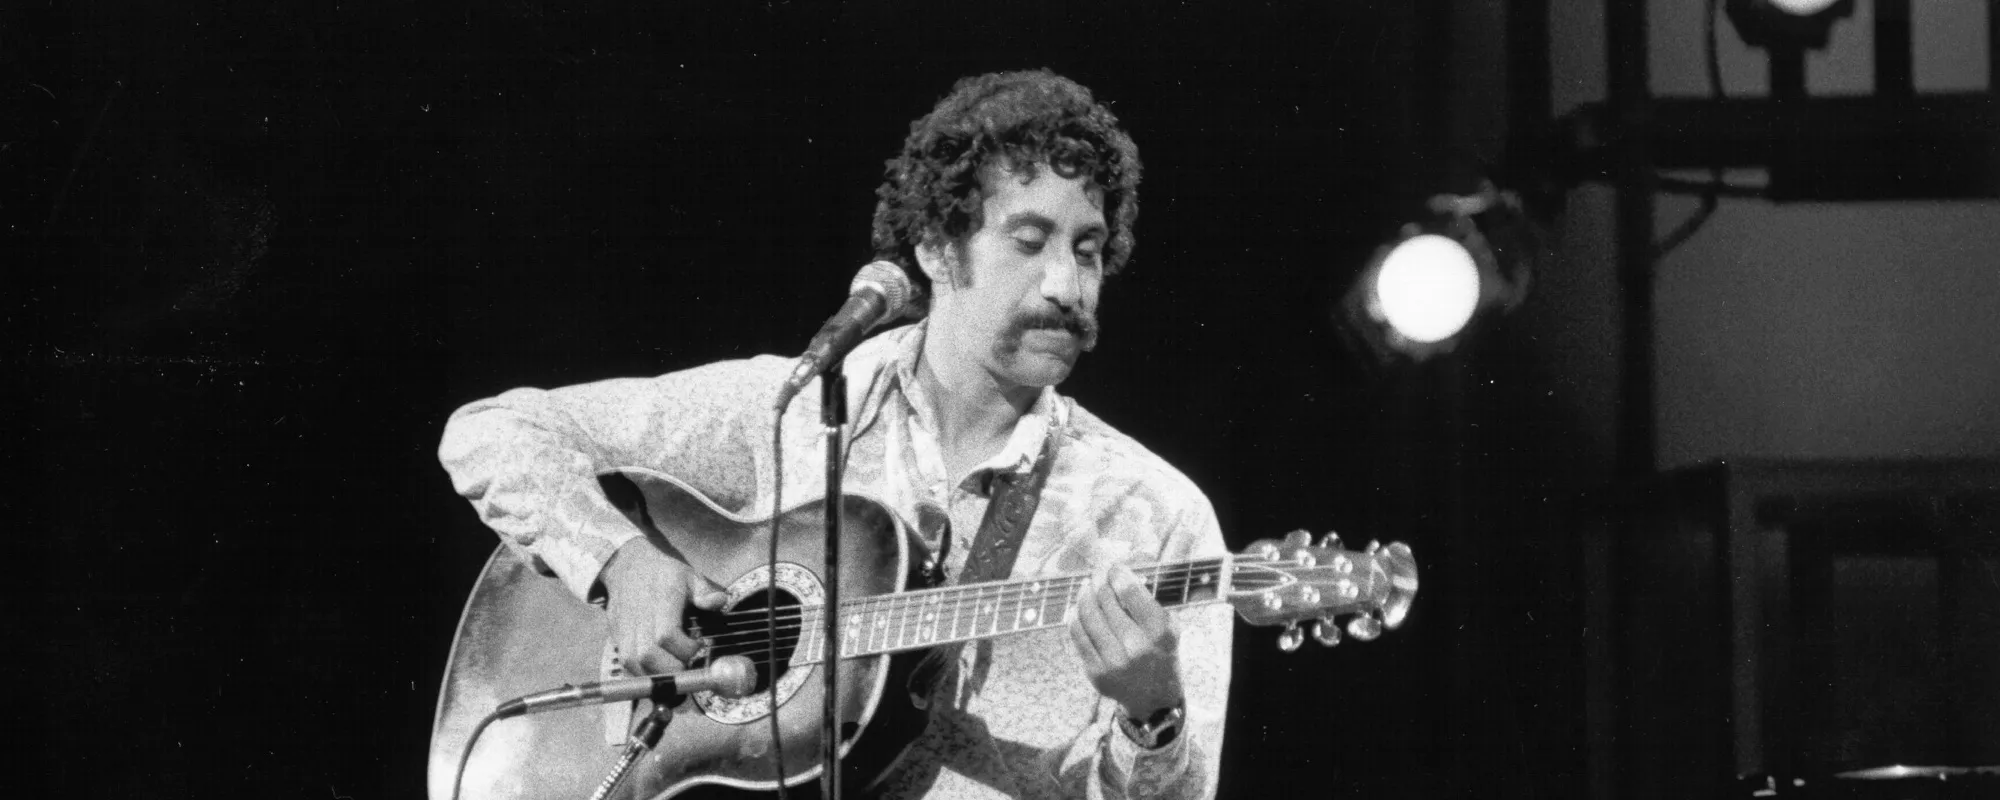 The Meaning Behind “Time in a Bottle” by Jim Croce